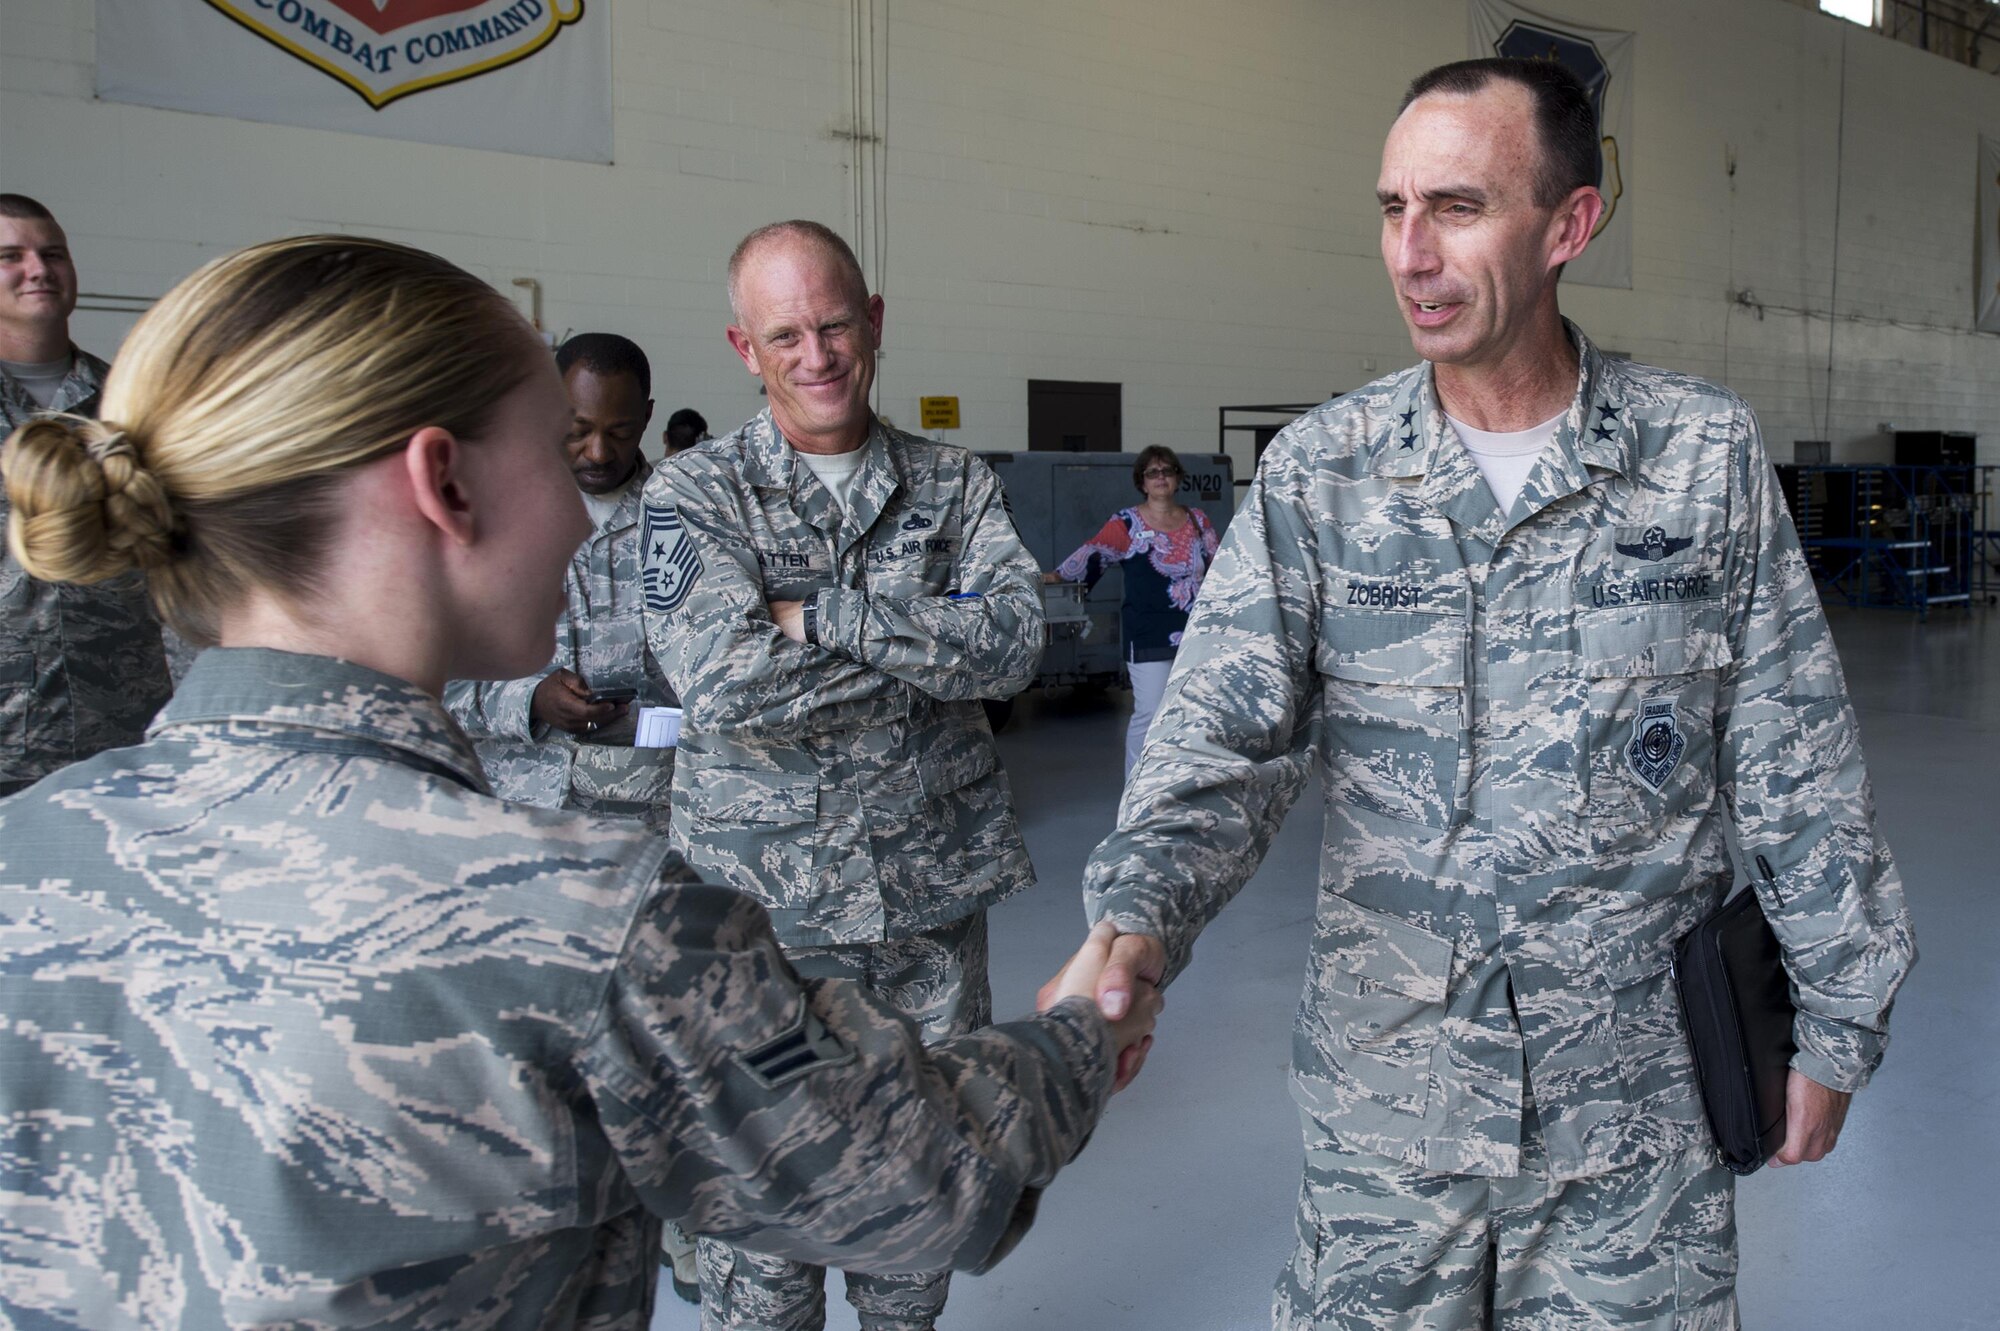 U.S. Air Force Maj. Gen. Scott Zobrist, Ninth Air Force commander, coins Airman 1st Class Felicia Anderson, 23d Aircraft Maintenance Squadron crew chief, during his visit, June 28, 2016, at Moody Air Force Base, Ga. Zobrist recognized Anderson as the 23d AMXS’s newest Below-the-Zone winner. (U.S. Air Force photo by Senior Airman Ceaira Young/Released)